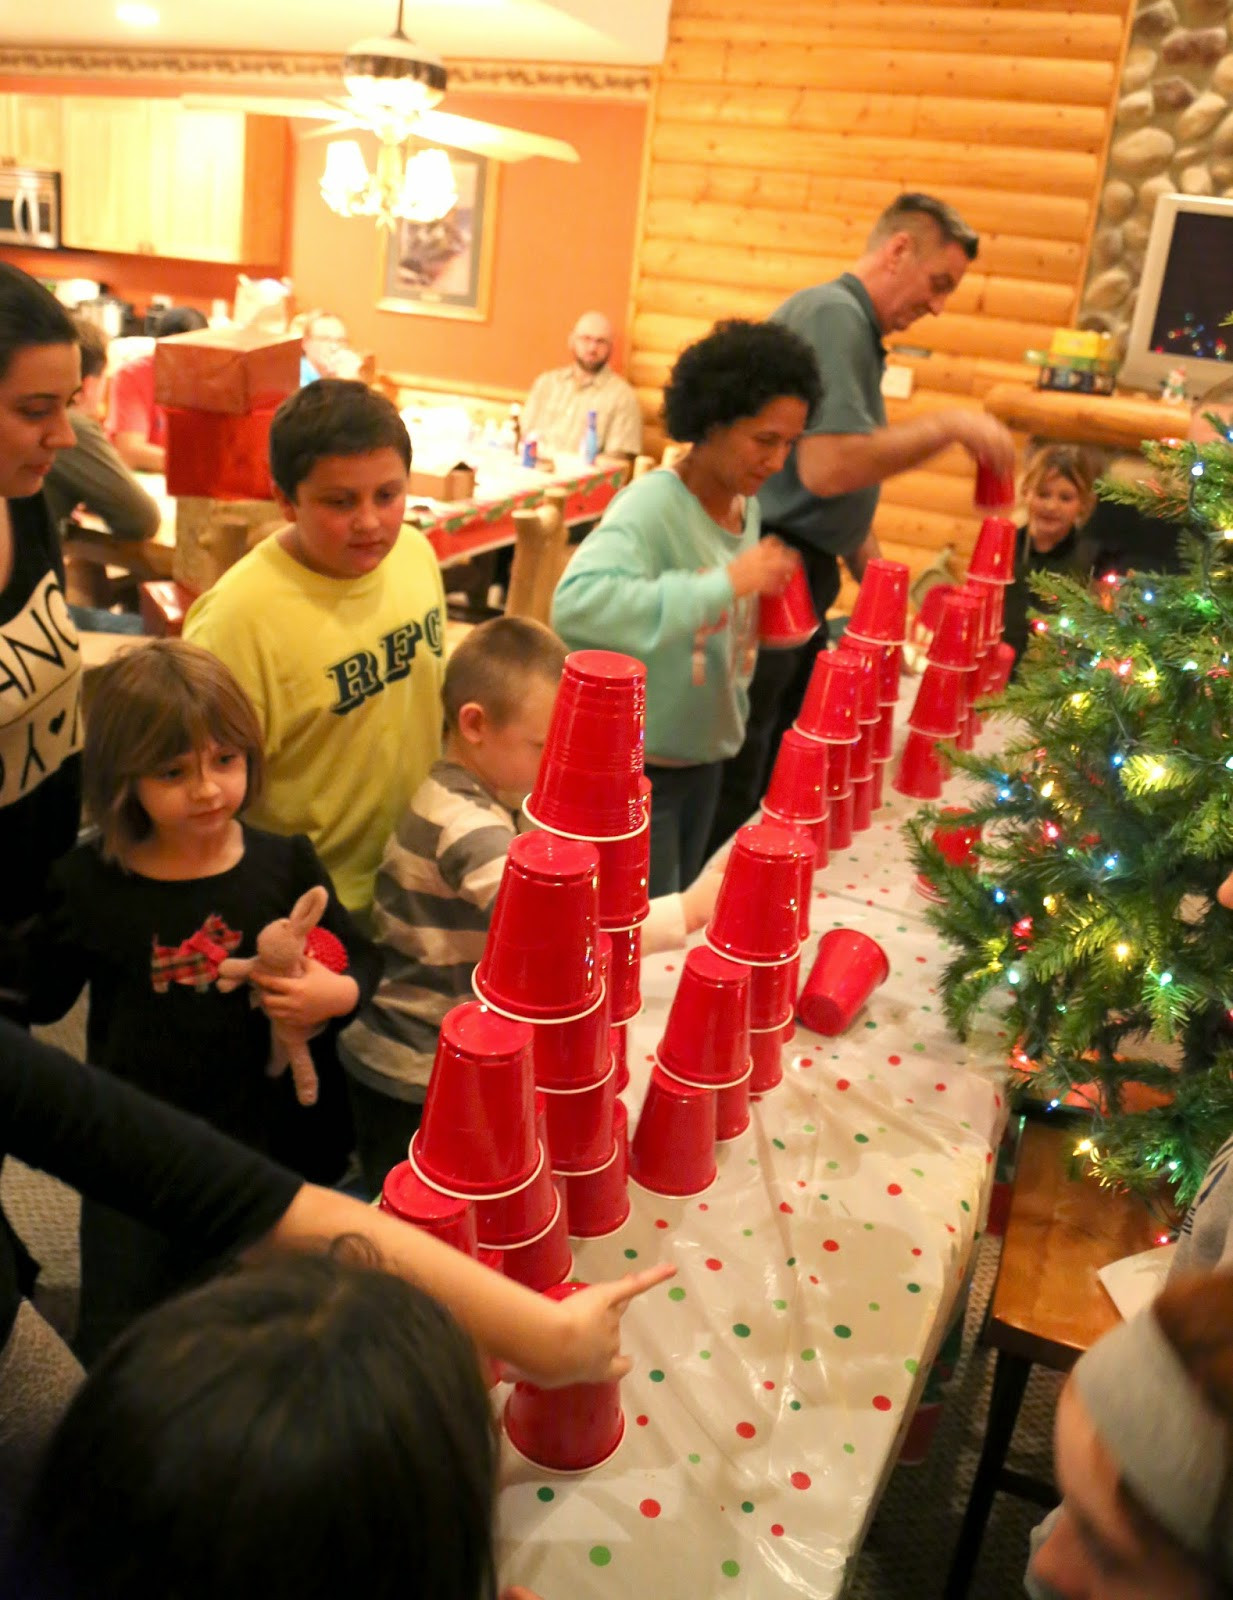 Christmas Party Ideas For Families
 Notable Nest Fun Family Christmas Party Games to Try